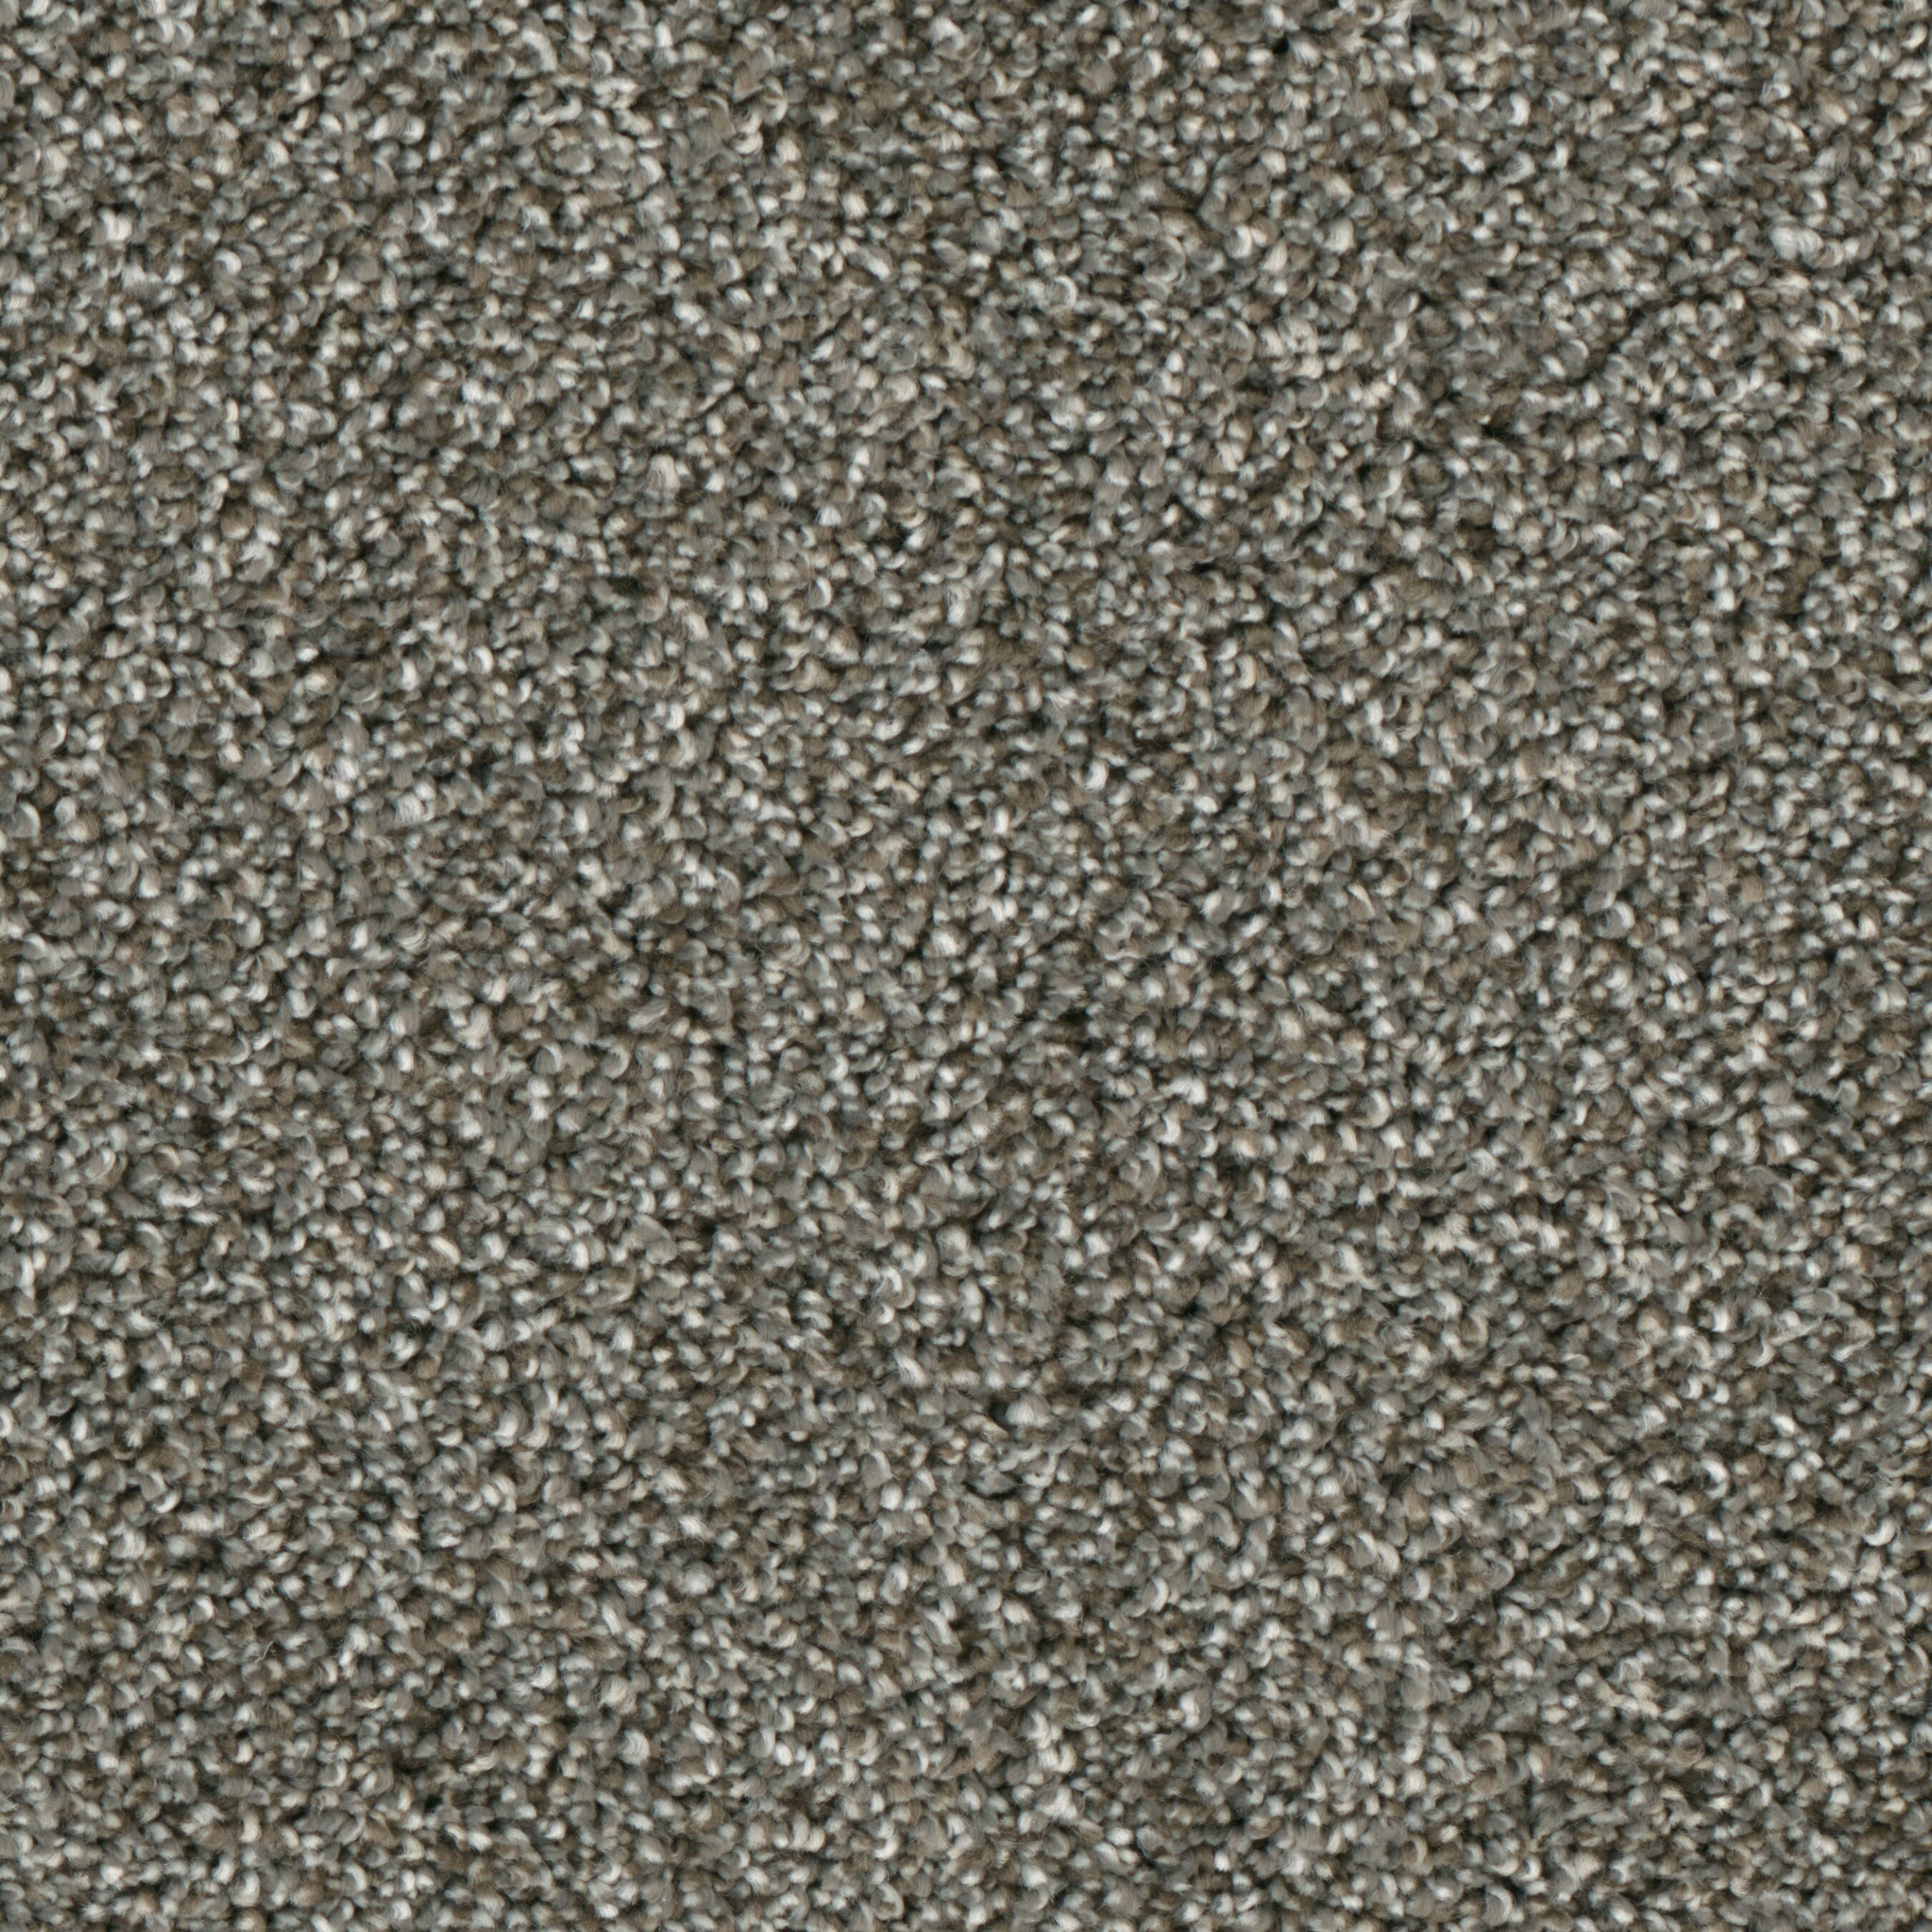 (Sample) Lenox Park Downtown Textured Indoor Carpet | - STAINMASTER S9255-954-S